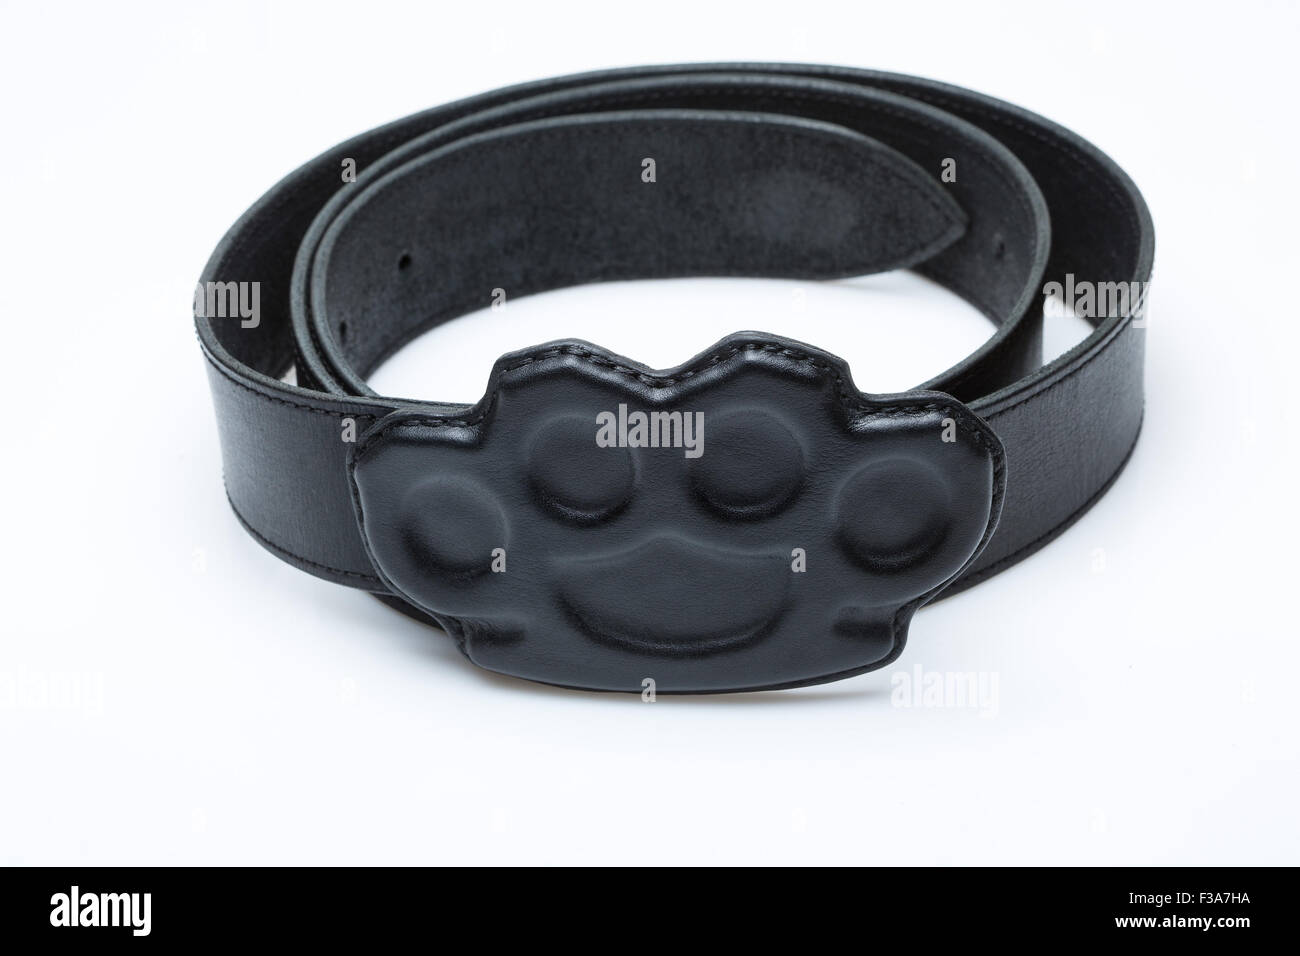 https://c8.alamy.com/comp/F3A7HA/black-belt-with-a-buckle-in-the-form-of-brass-knuckles-F3A7HA.jpg